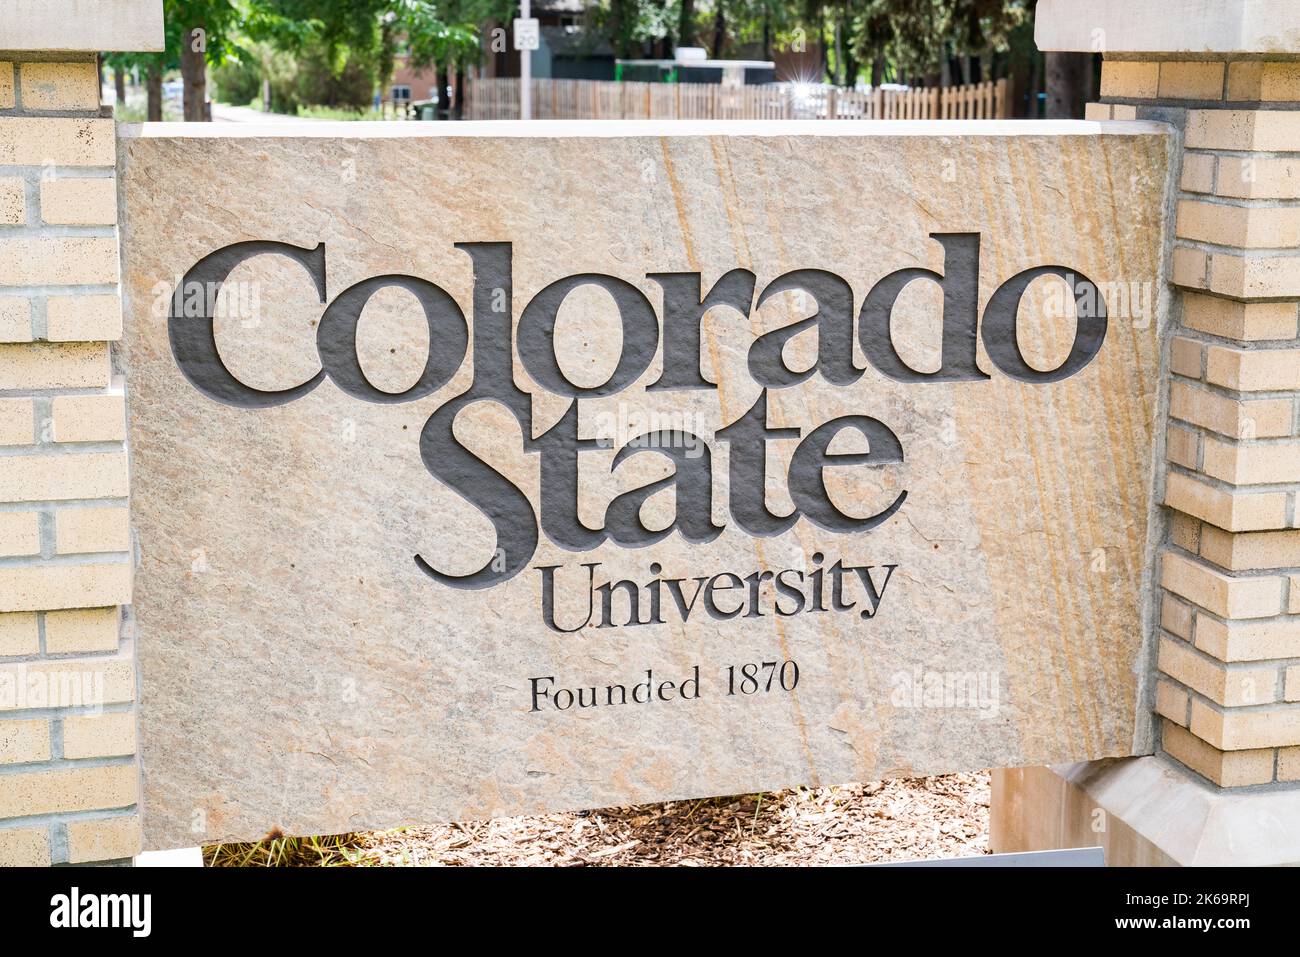 Fort Collins, CO - July 16, 2022: Entrance sign to the Colorado State University in Fort Collins, Colorado Stock Photo